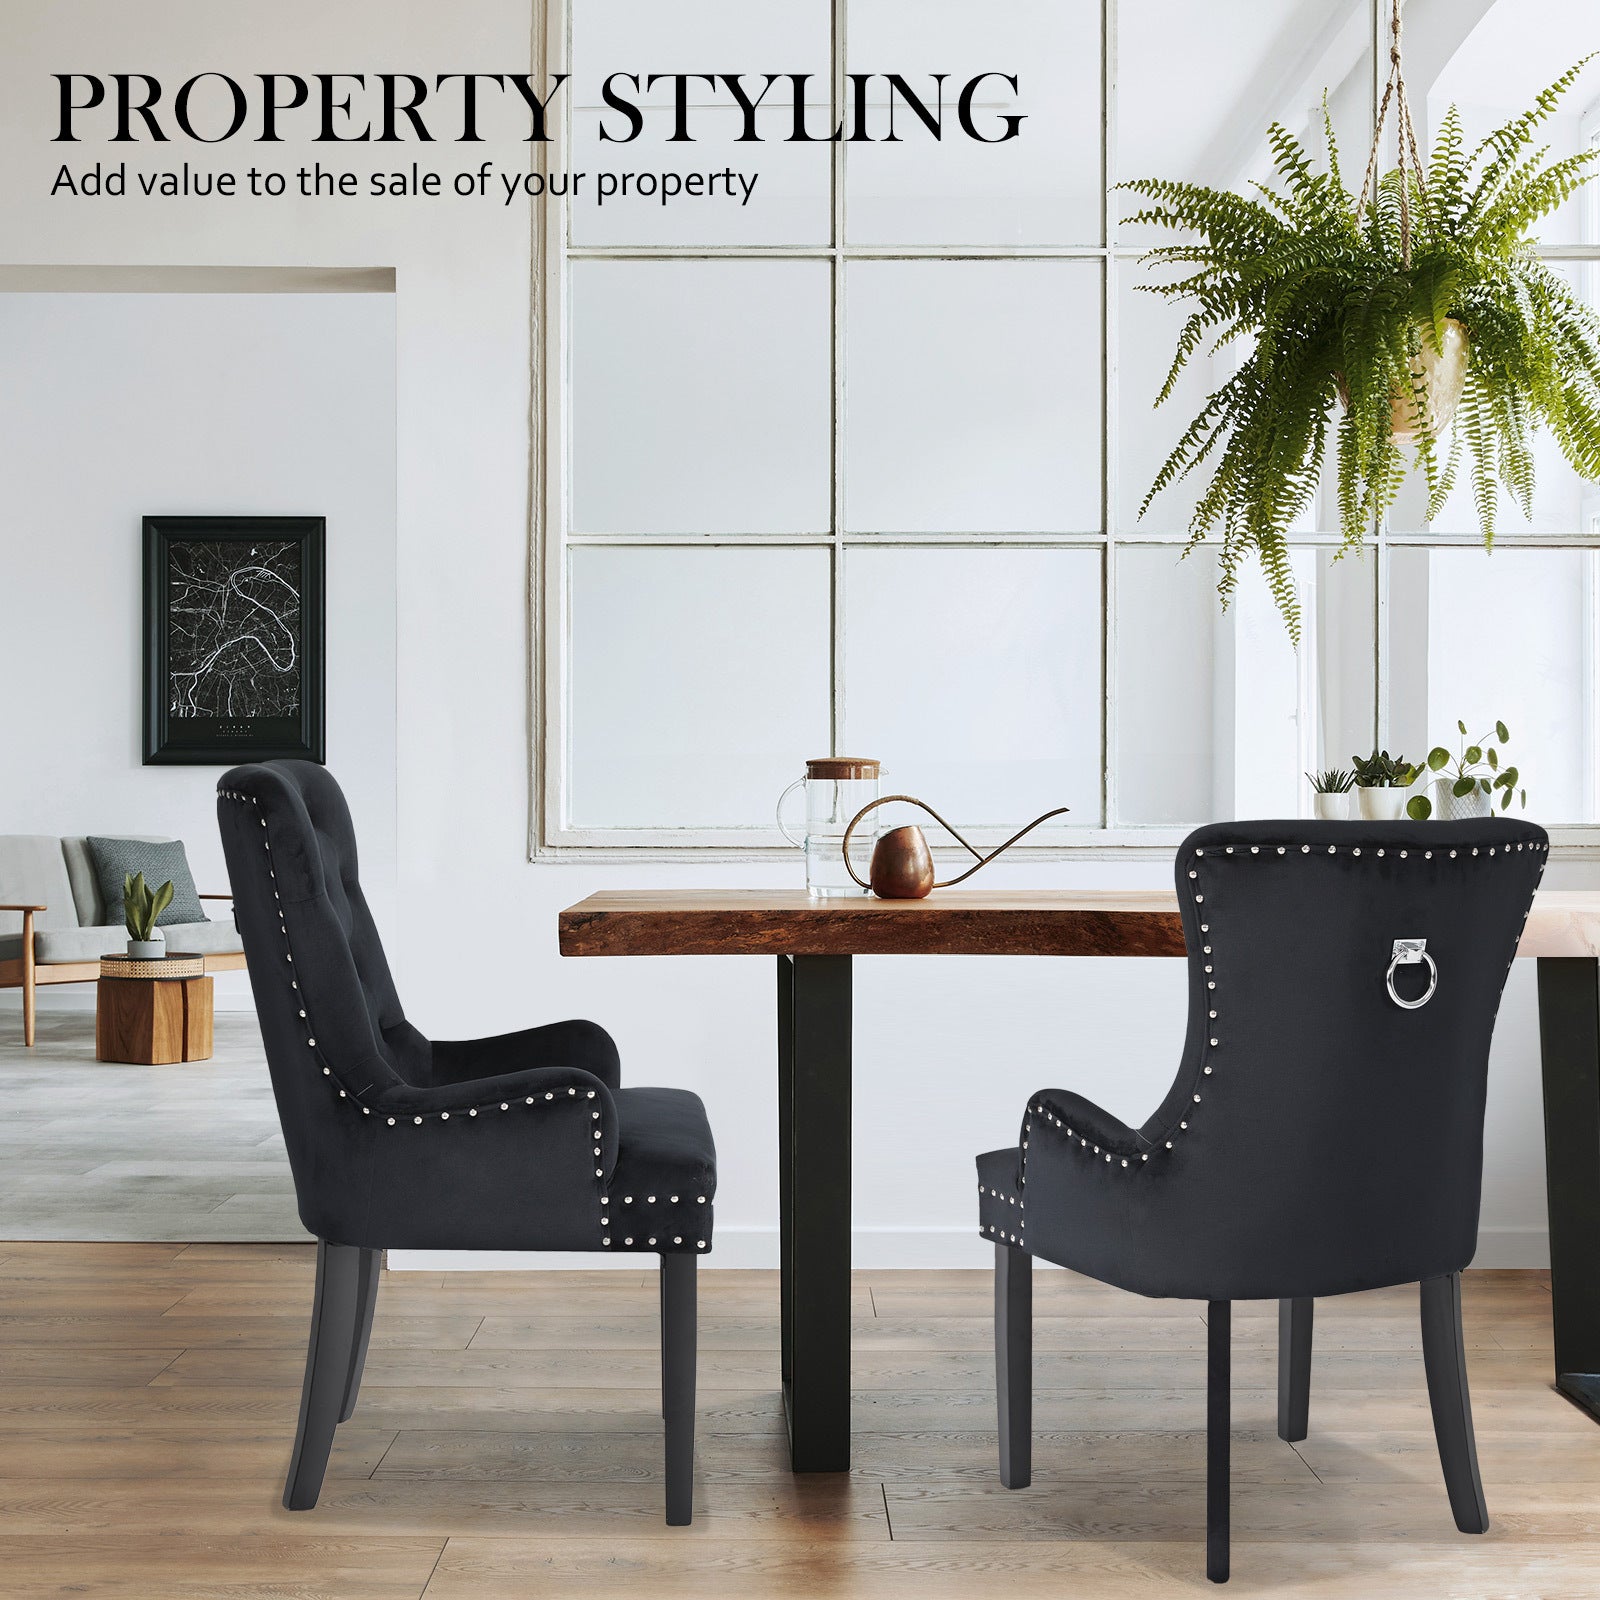 La Bella Set of 2 Black French Provincial Dining Chair with Studded Trim - BM House & Garden